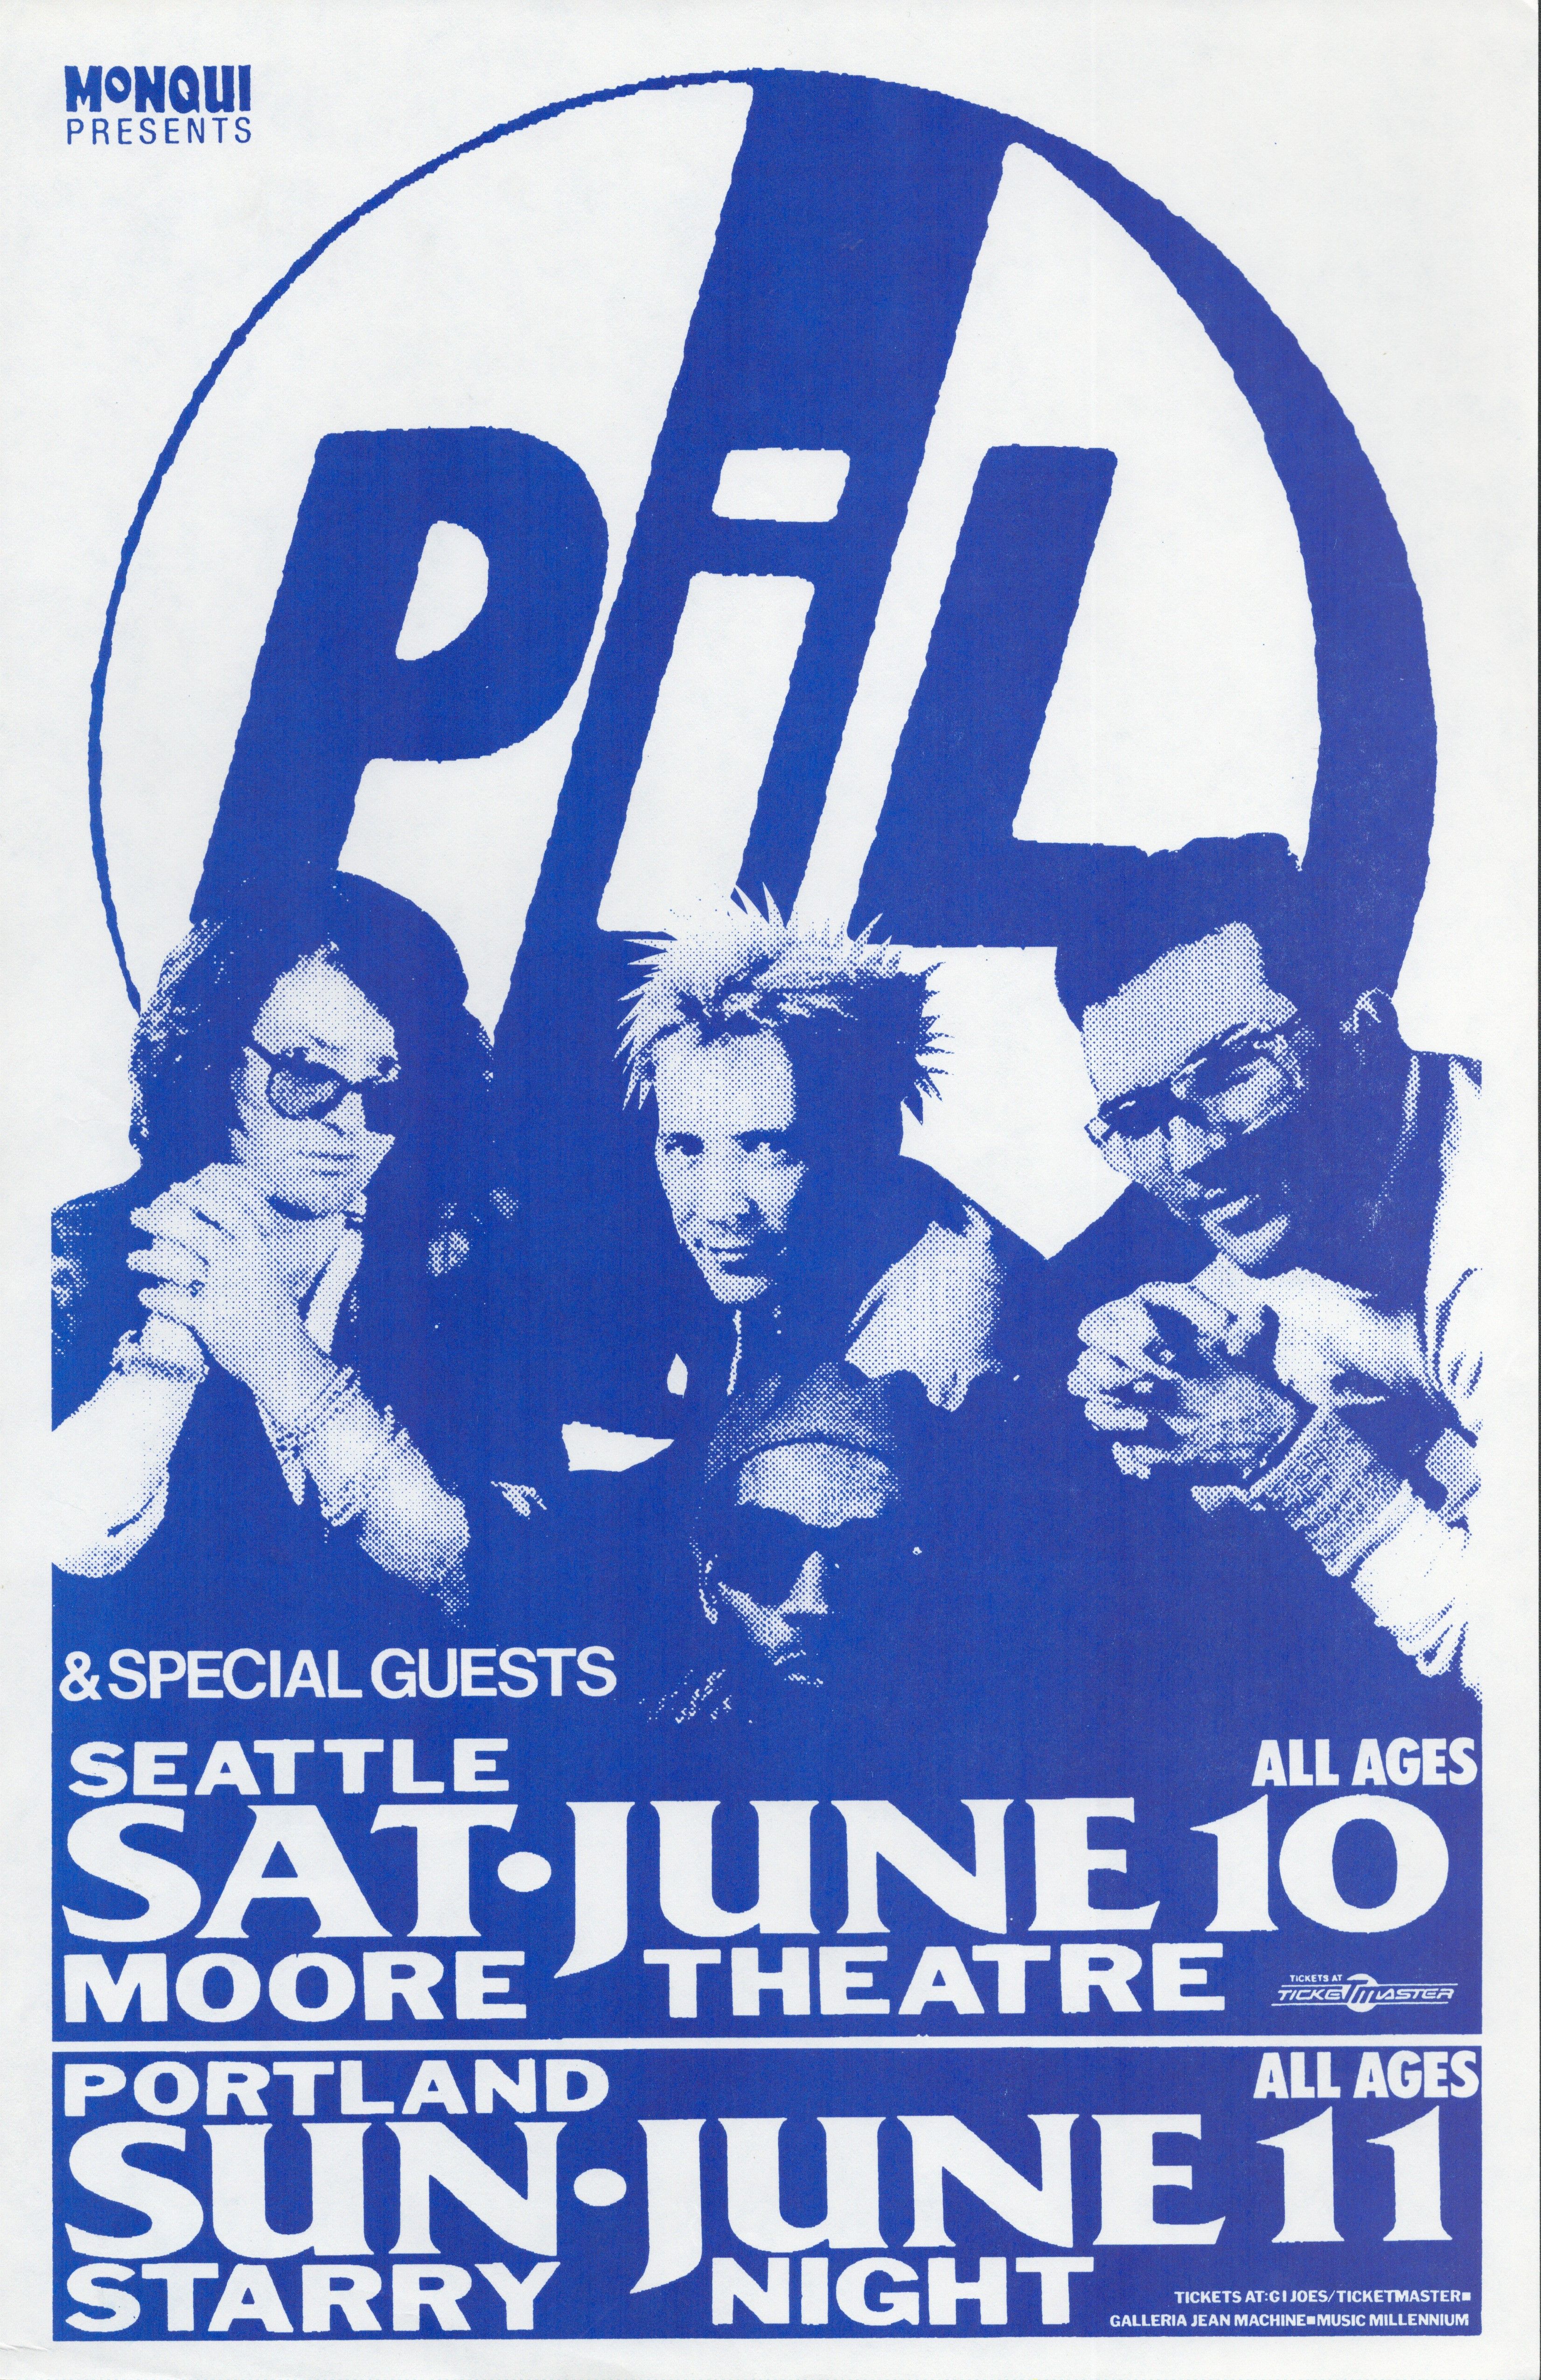 MXP-105.9 Public Image Limited Moore Theater & Starry Night 1989 Jun 11 Concert Poster